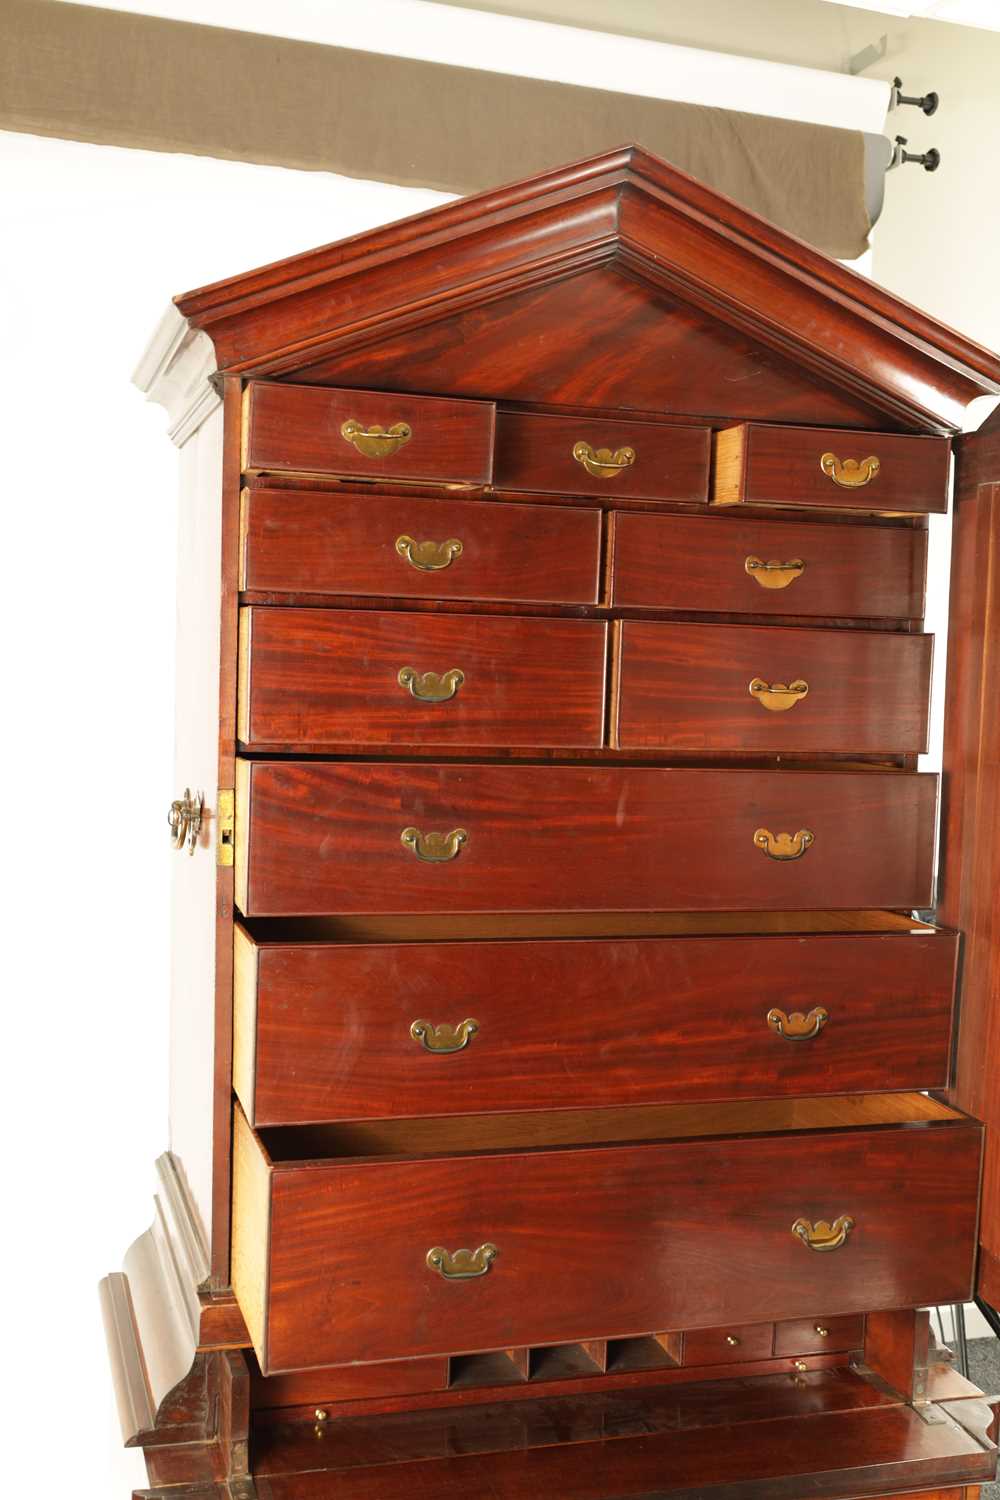 A FINE GEORGE II FIGURED MAHOGANY ARCHITECTURAL SECRETAIRE CABINET IN THE MANNER OF JOHN CHANNON - Image 7 of 14